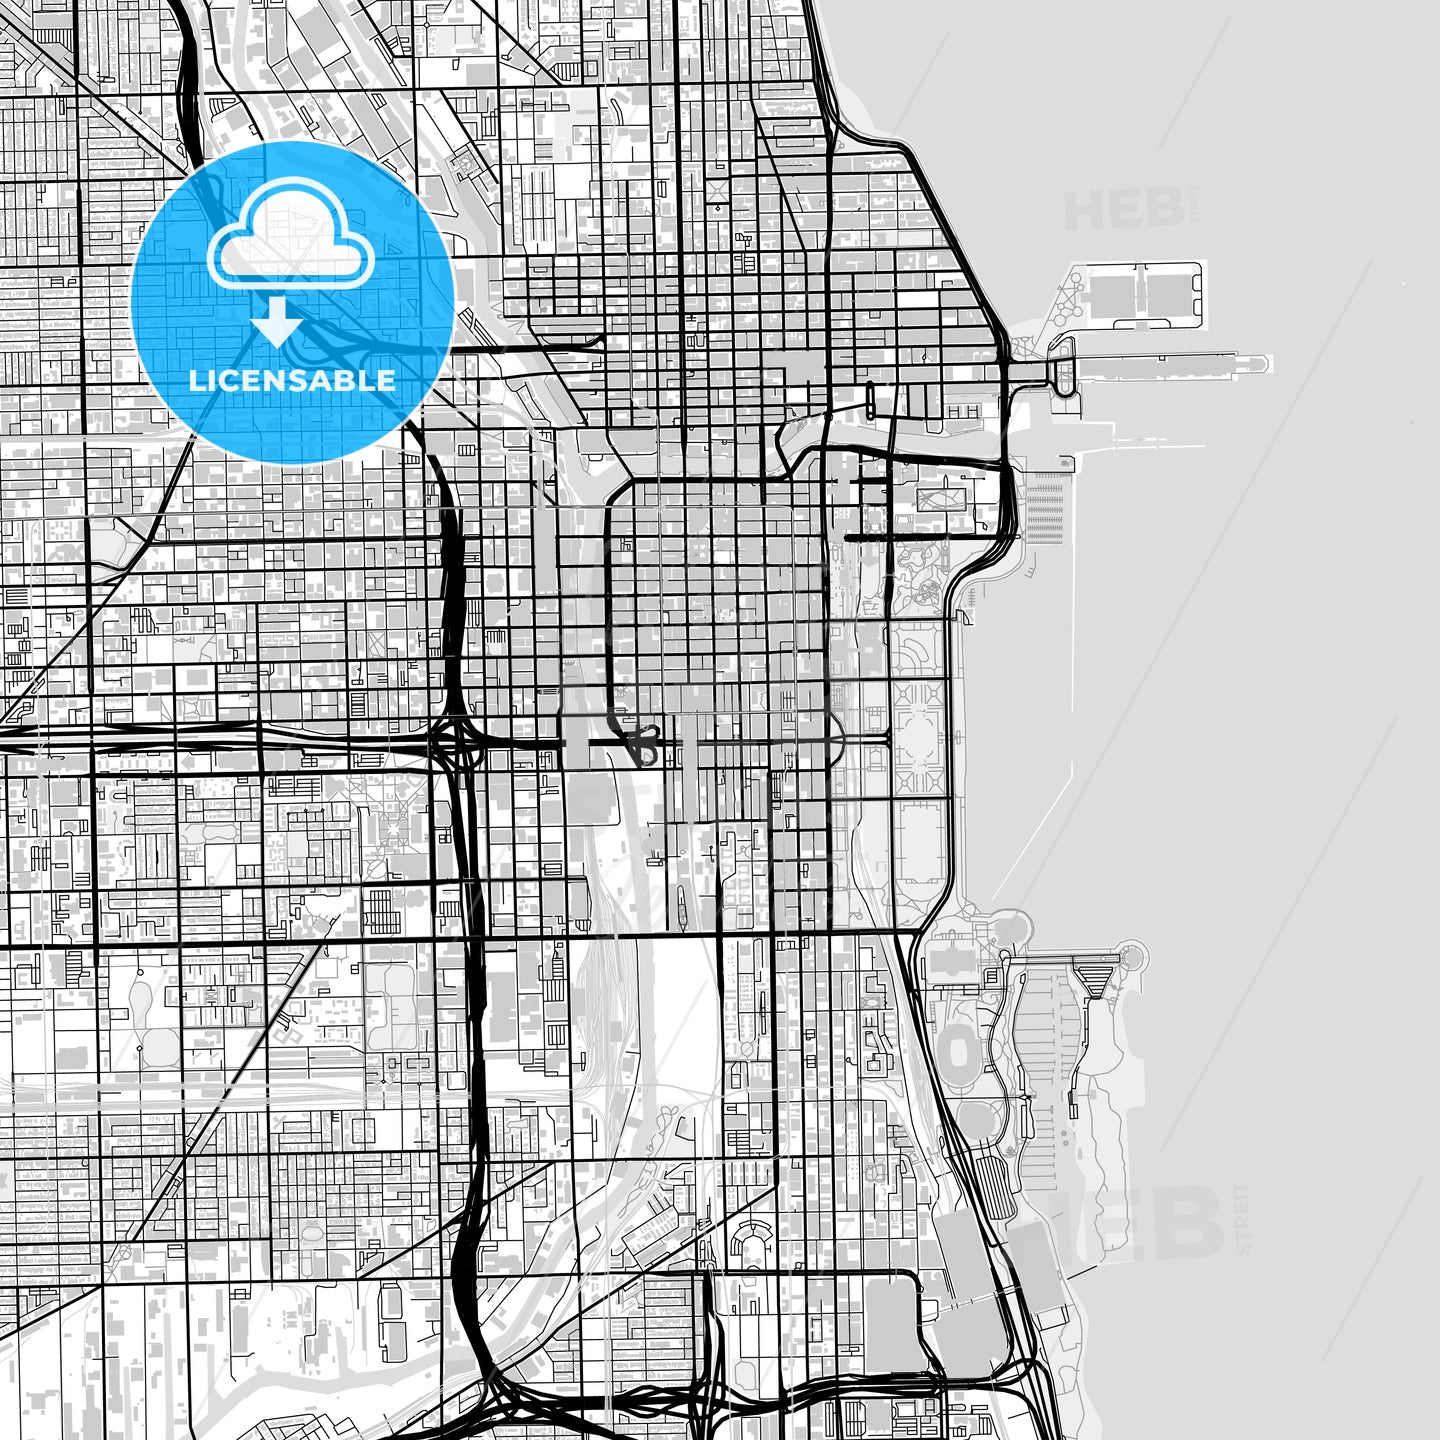 Downtown map of Chicago, light